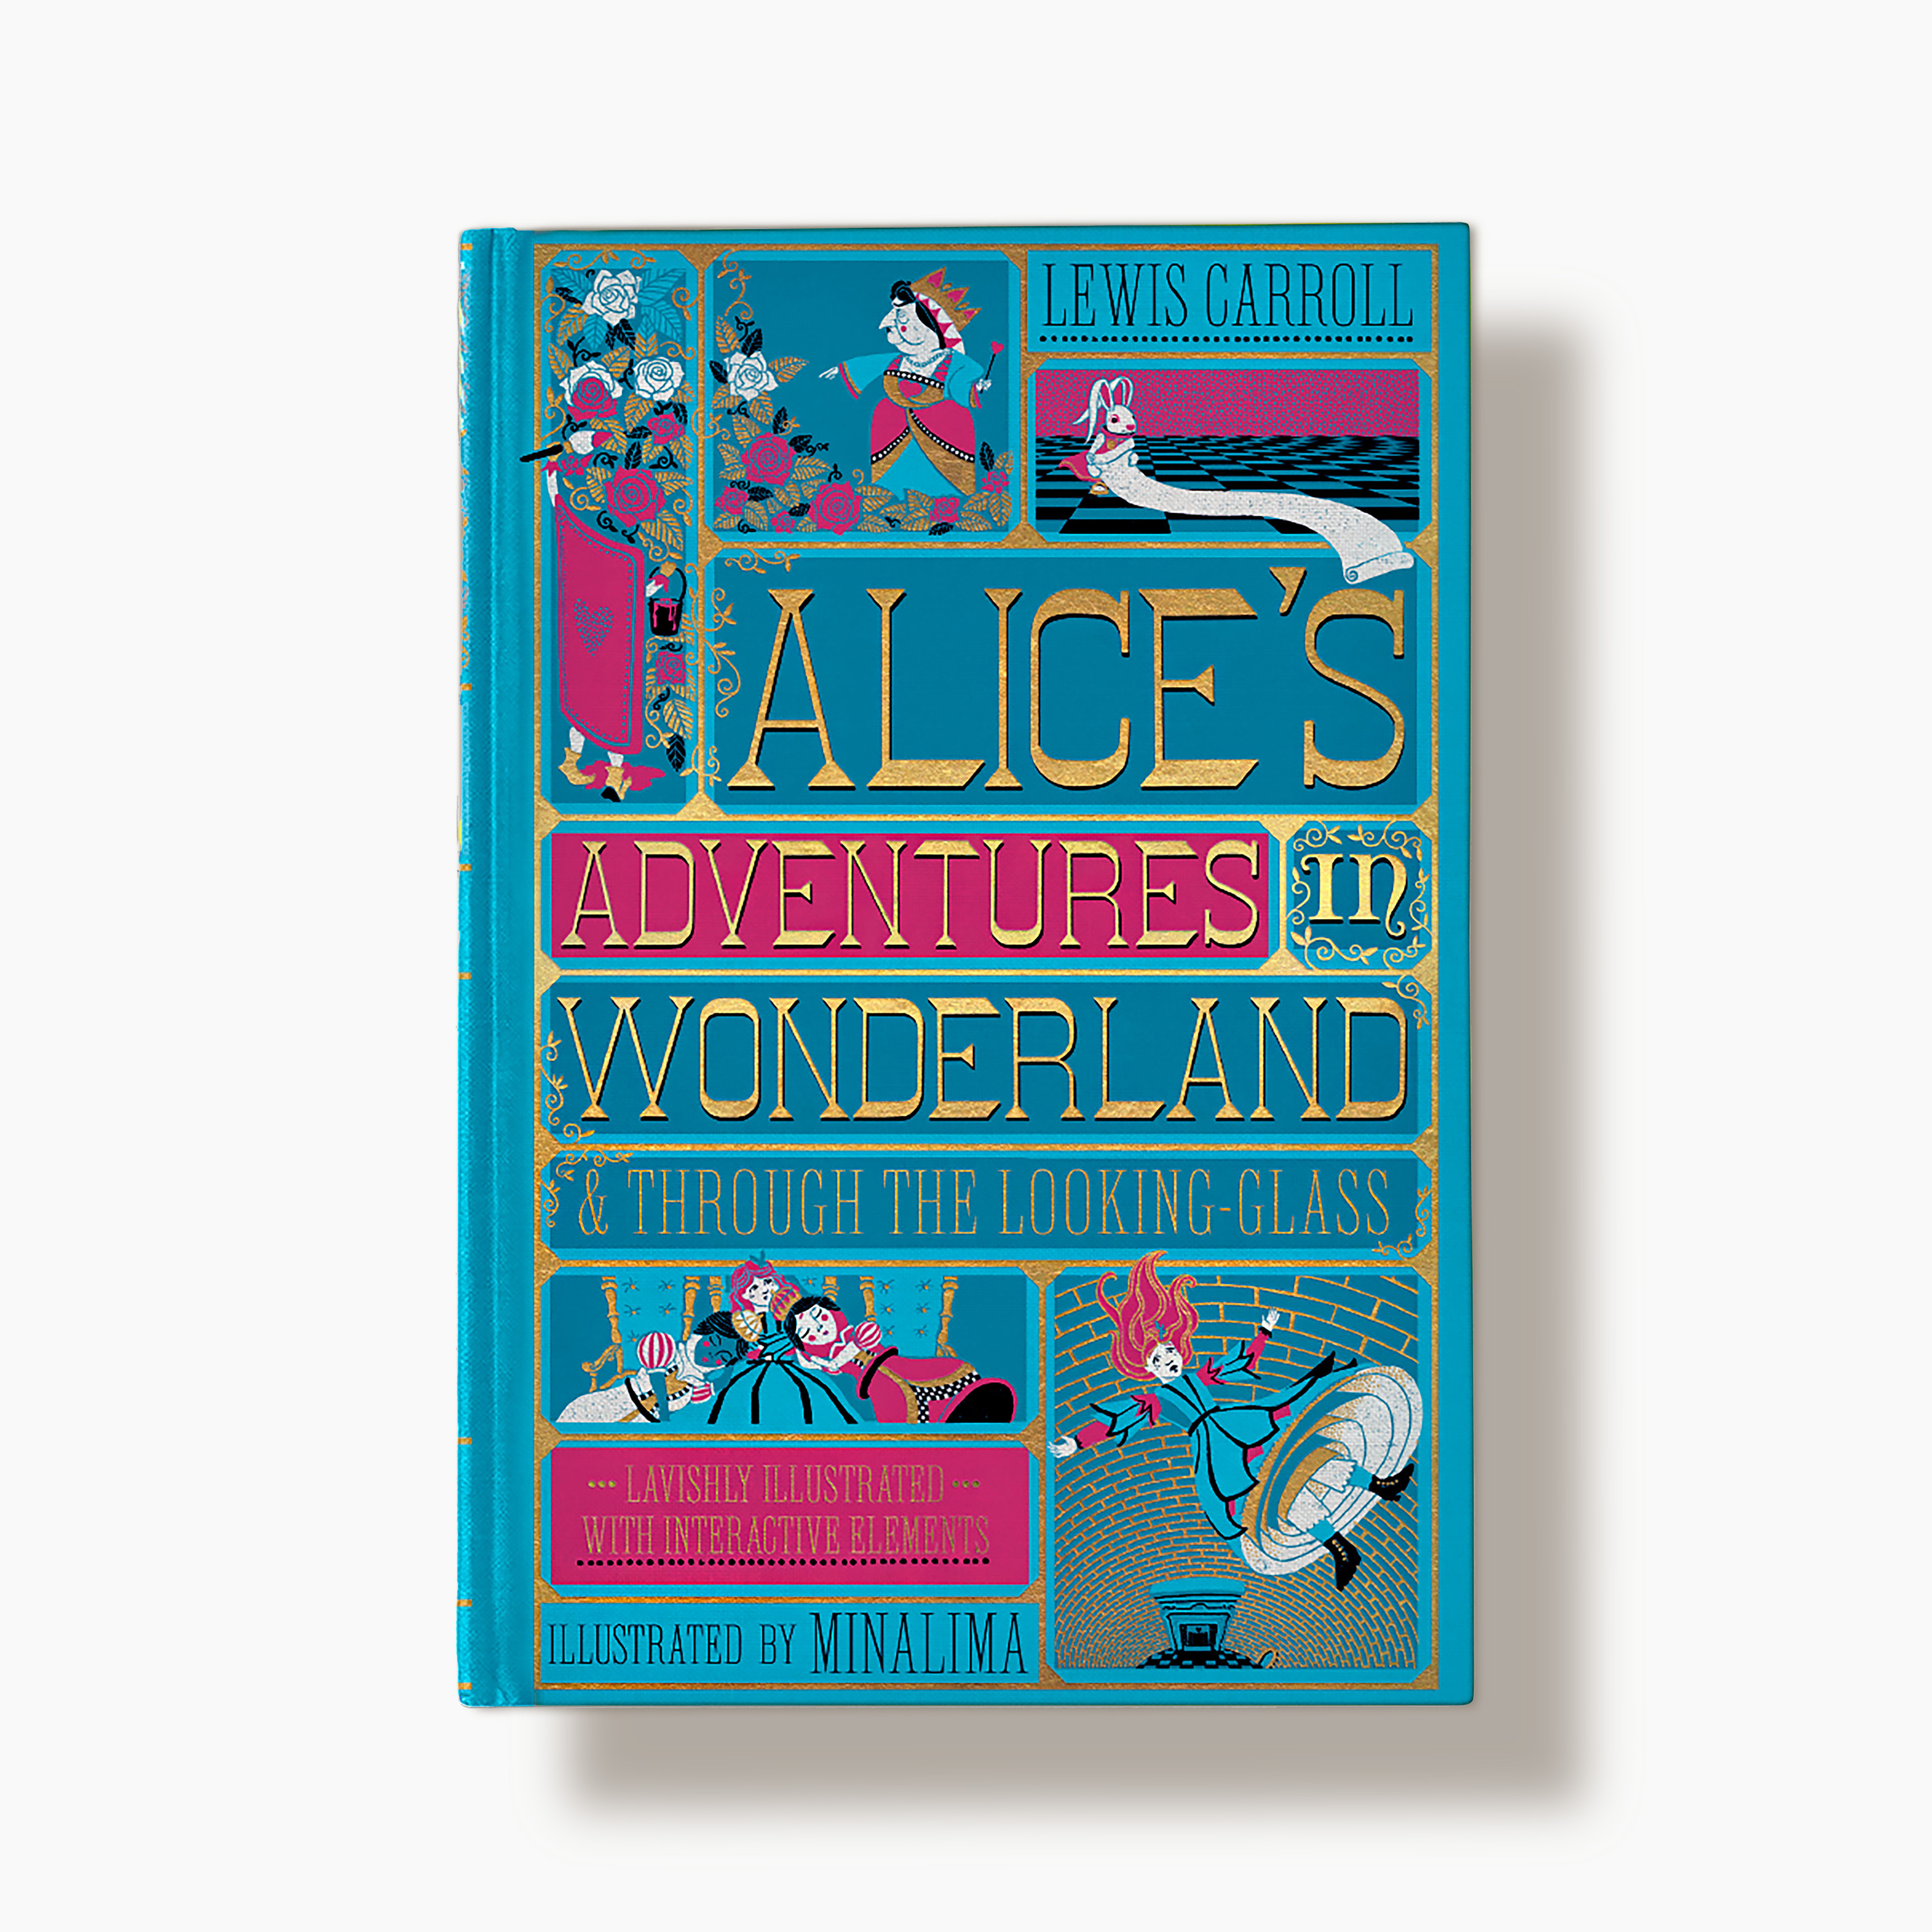 in　Wonderland　Alice's　MinaLima　the　Looking-Glass　Adventures　Edition)　Through　(UK